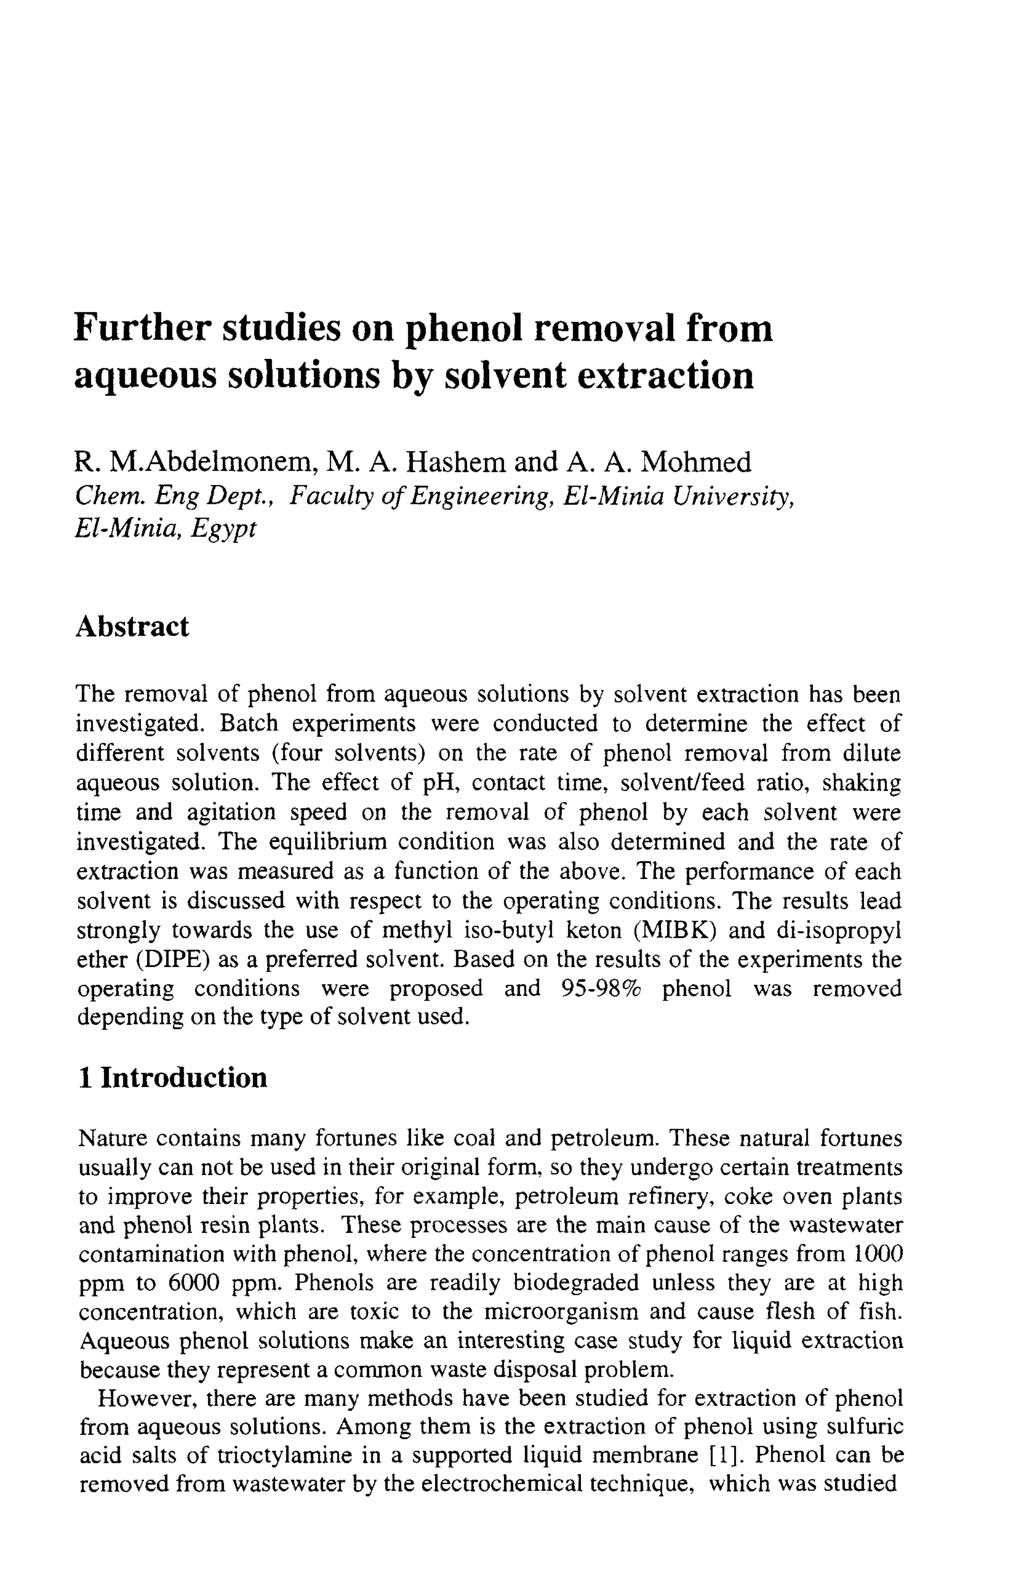 Further studies on phenol removal from aqueous solutions by solvent extraction R. M.Abdelmonem, M. A. Hashem and A. A. Mohmed Chem. Eng Dept.